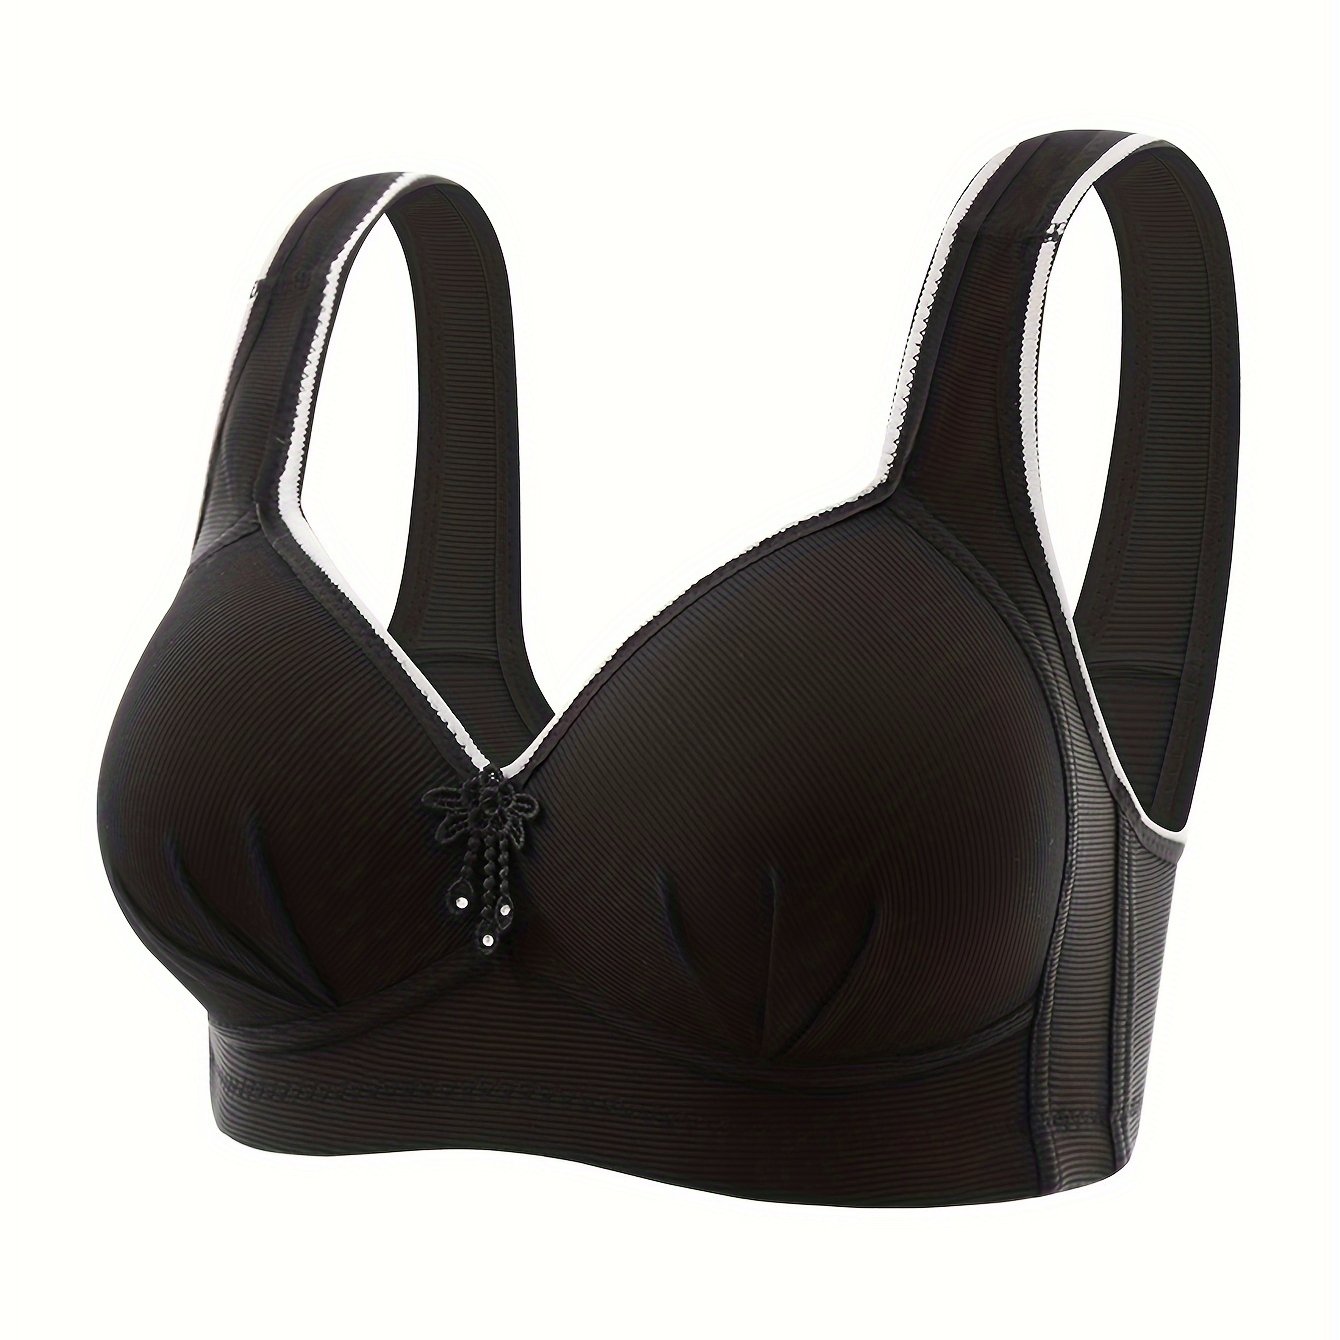 Women‘s Lingerie & Underwear Get Comfy & Lightweight with this Simple  Push-Up Bra!